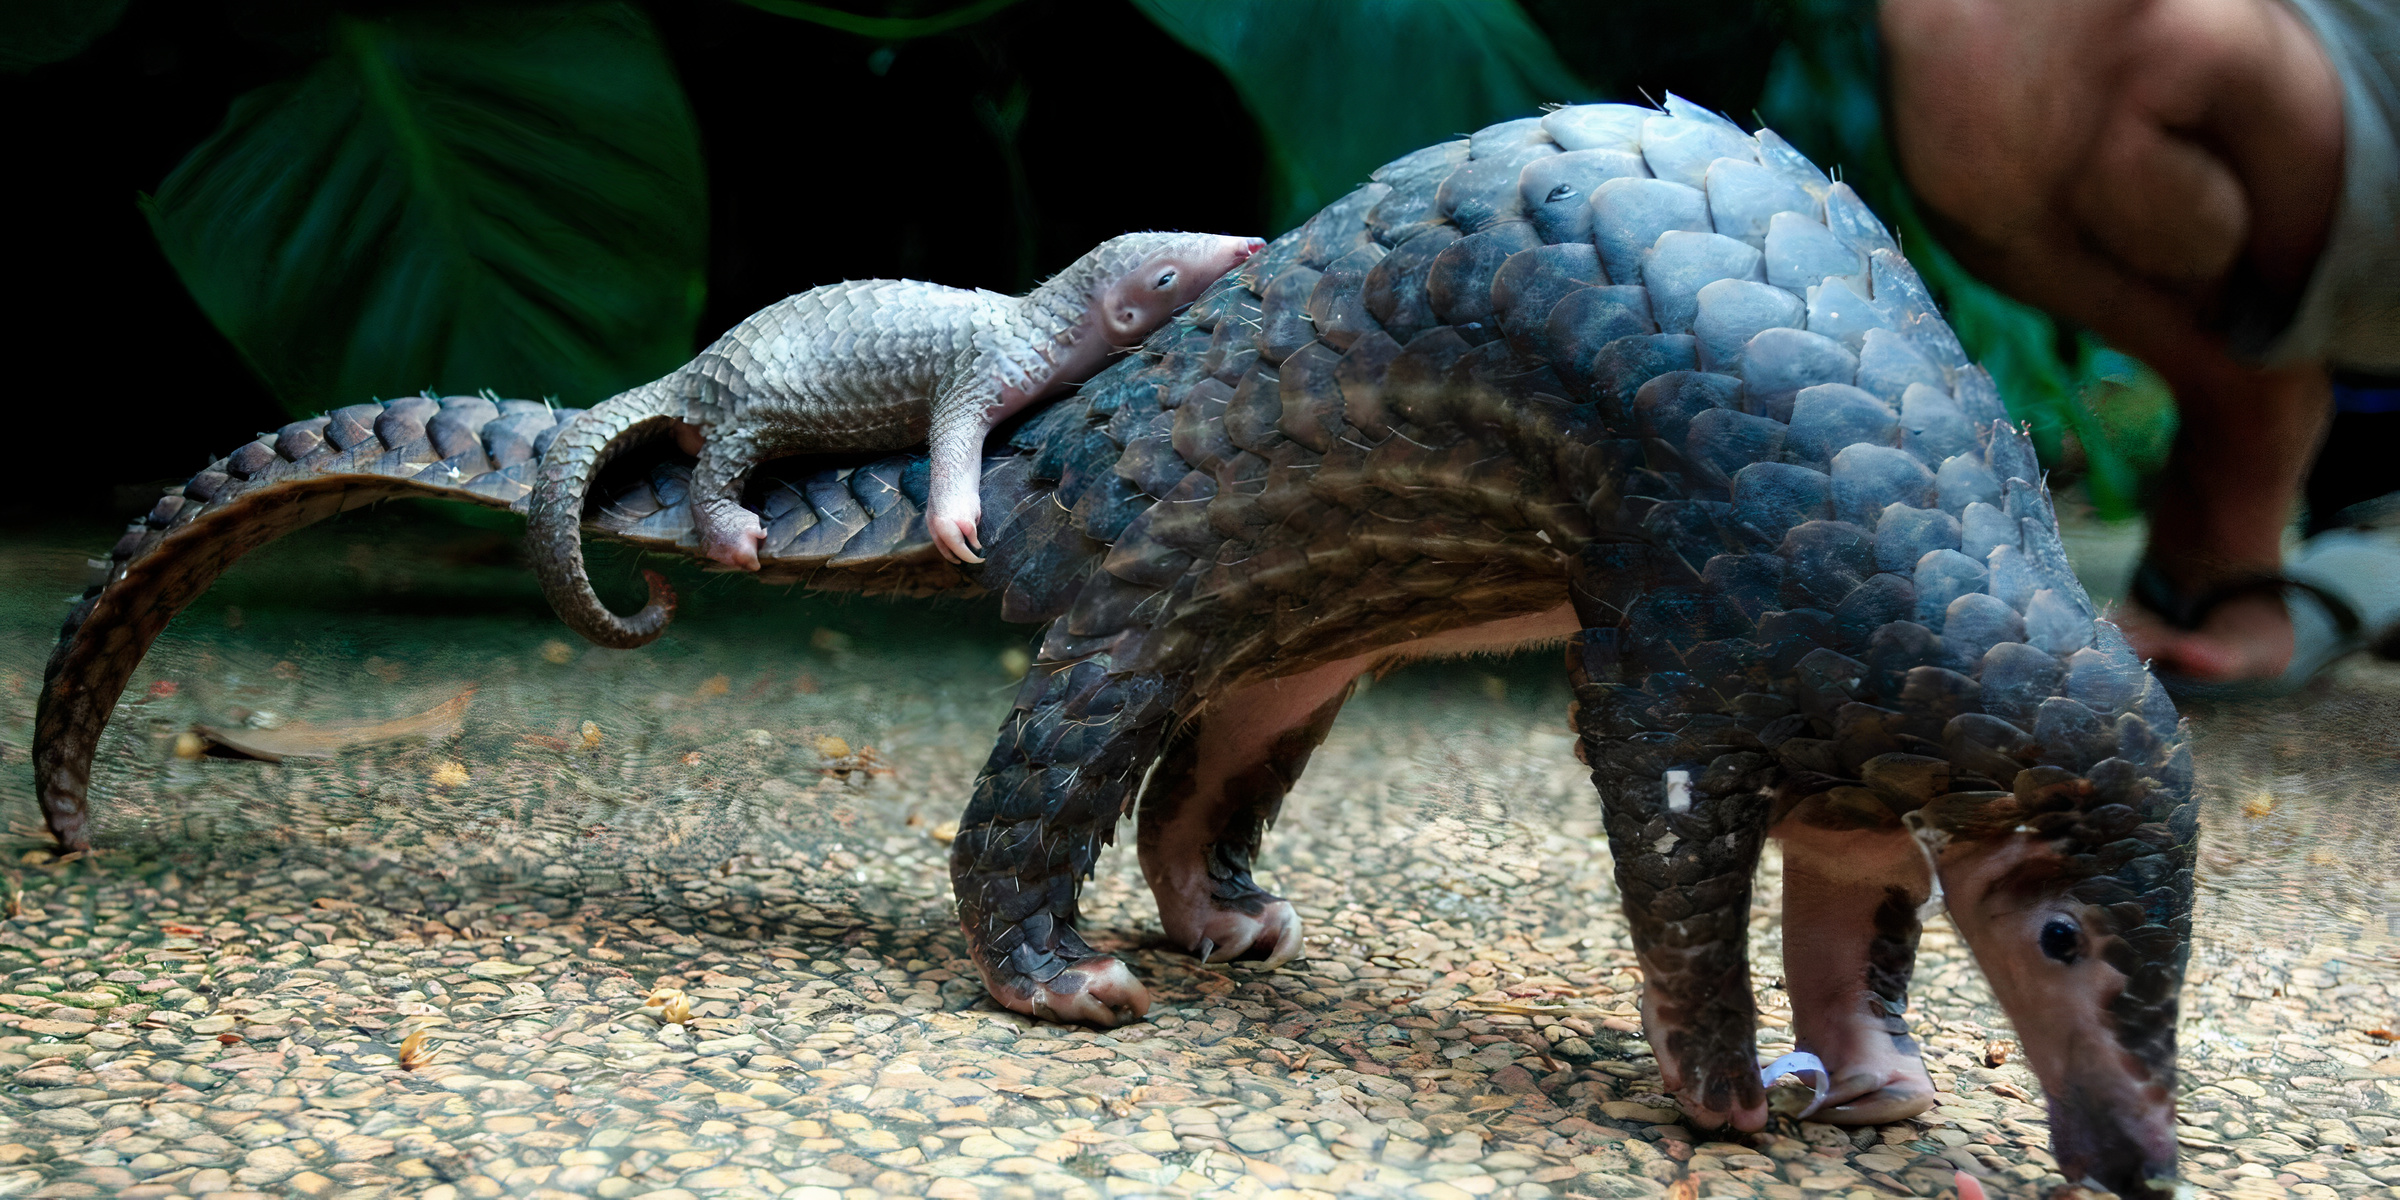 Sunda Pangolin with an offspring resting on the tail.